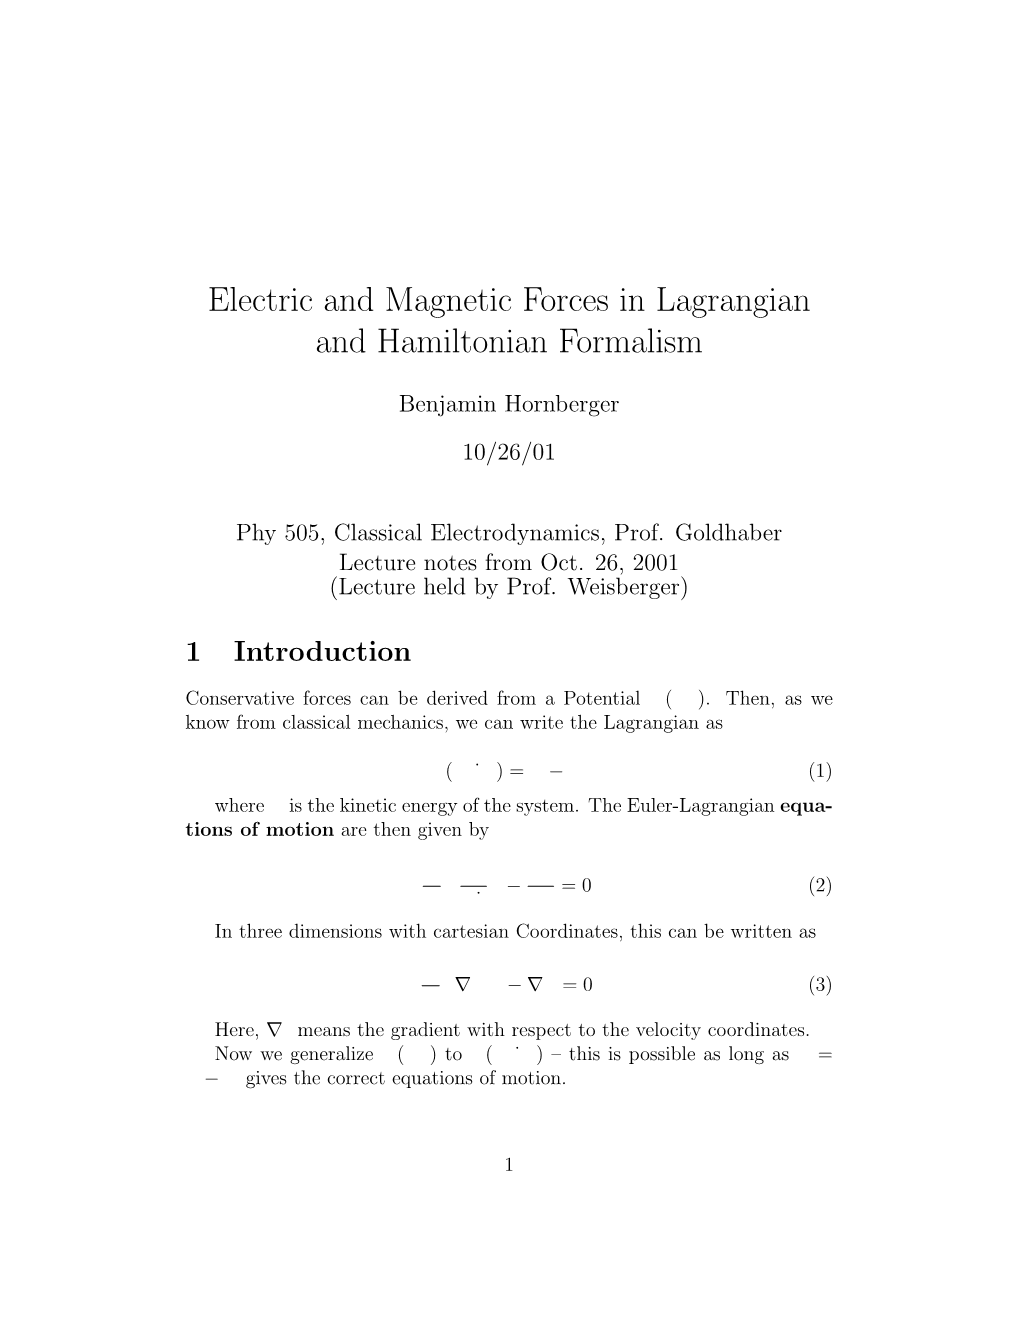 Electric and Magnetic Forces in Lagrangian and Hamiltonian Formalism